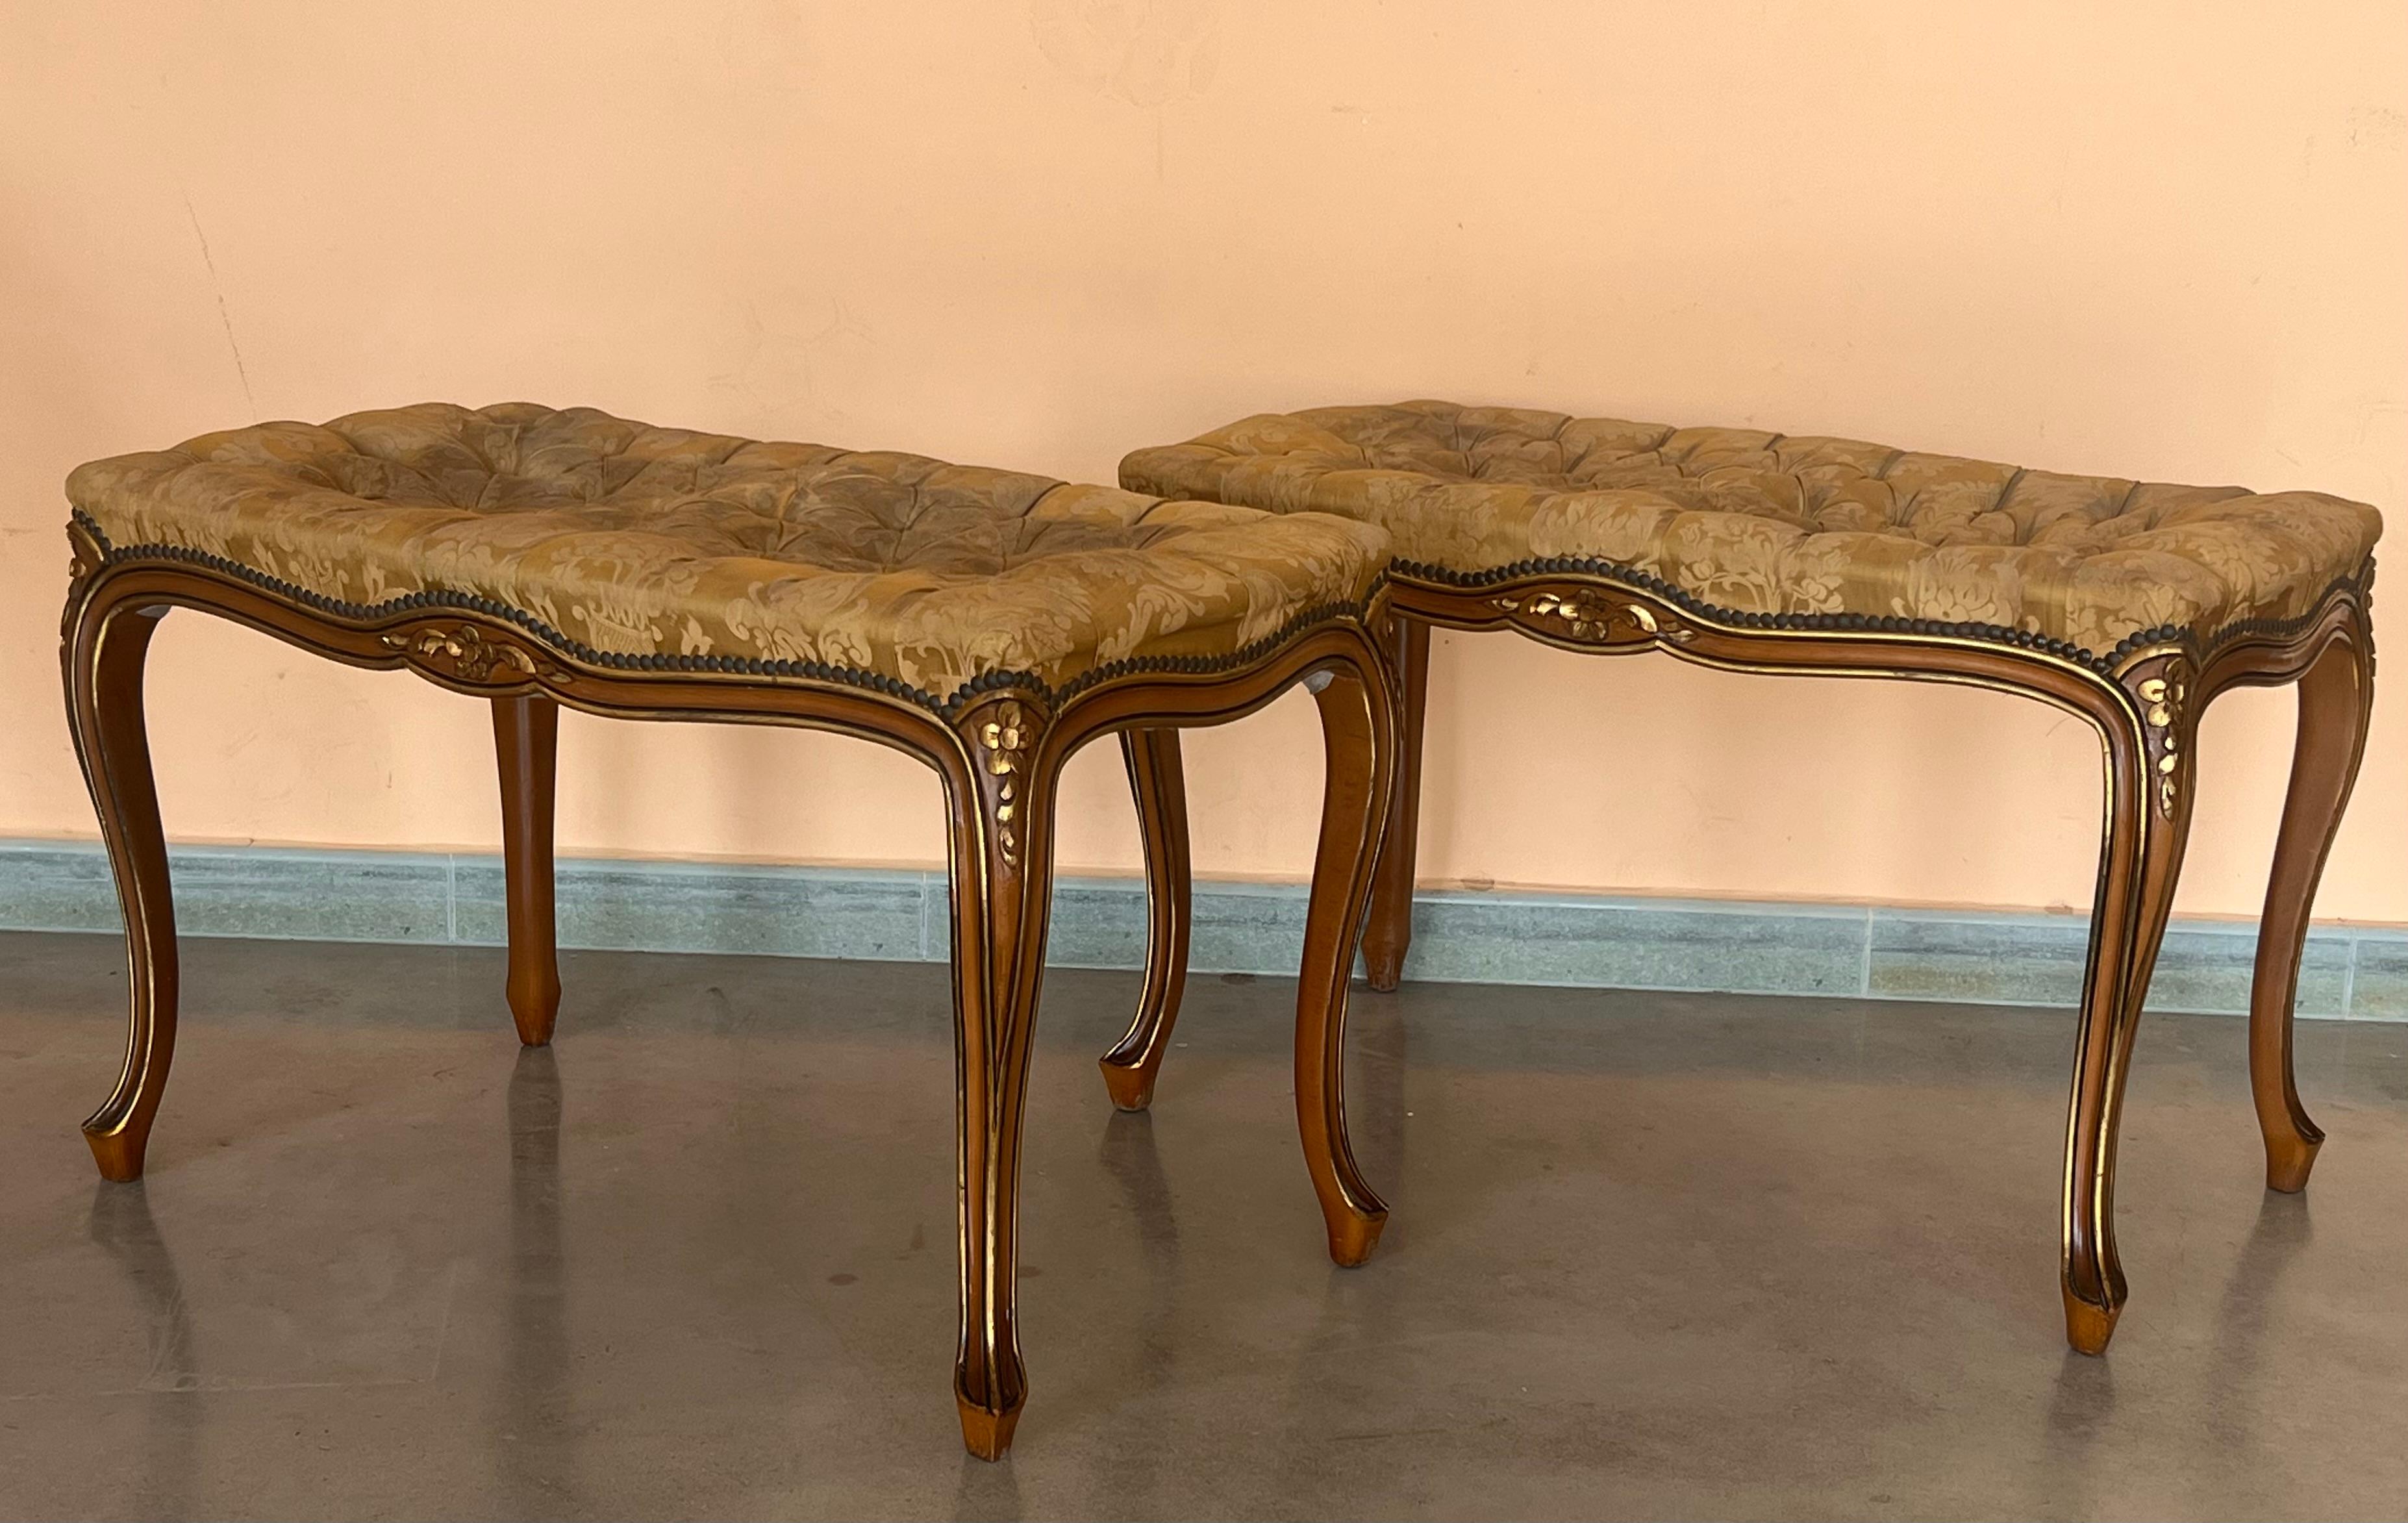 Pair of tufted French Louis XV style benches. There are beautiful carved details throughout. The bench stands on four cabriole legs that end in rams head feet. They are upholstered in dams that has some wear but no tears or damage. It actually has a